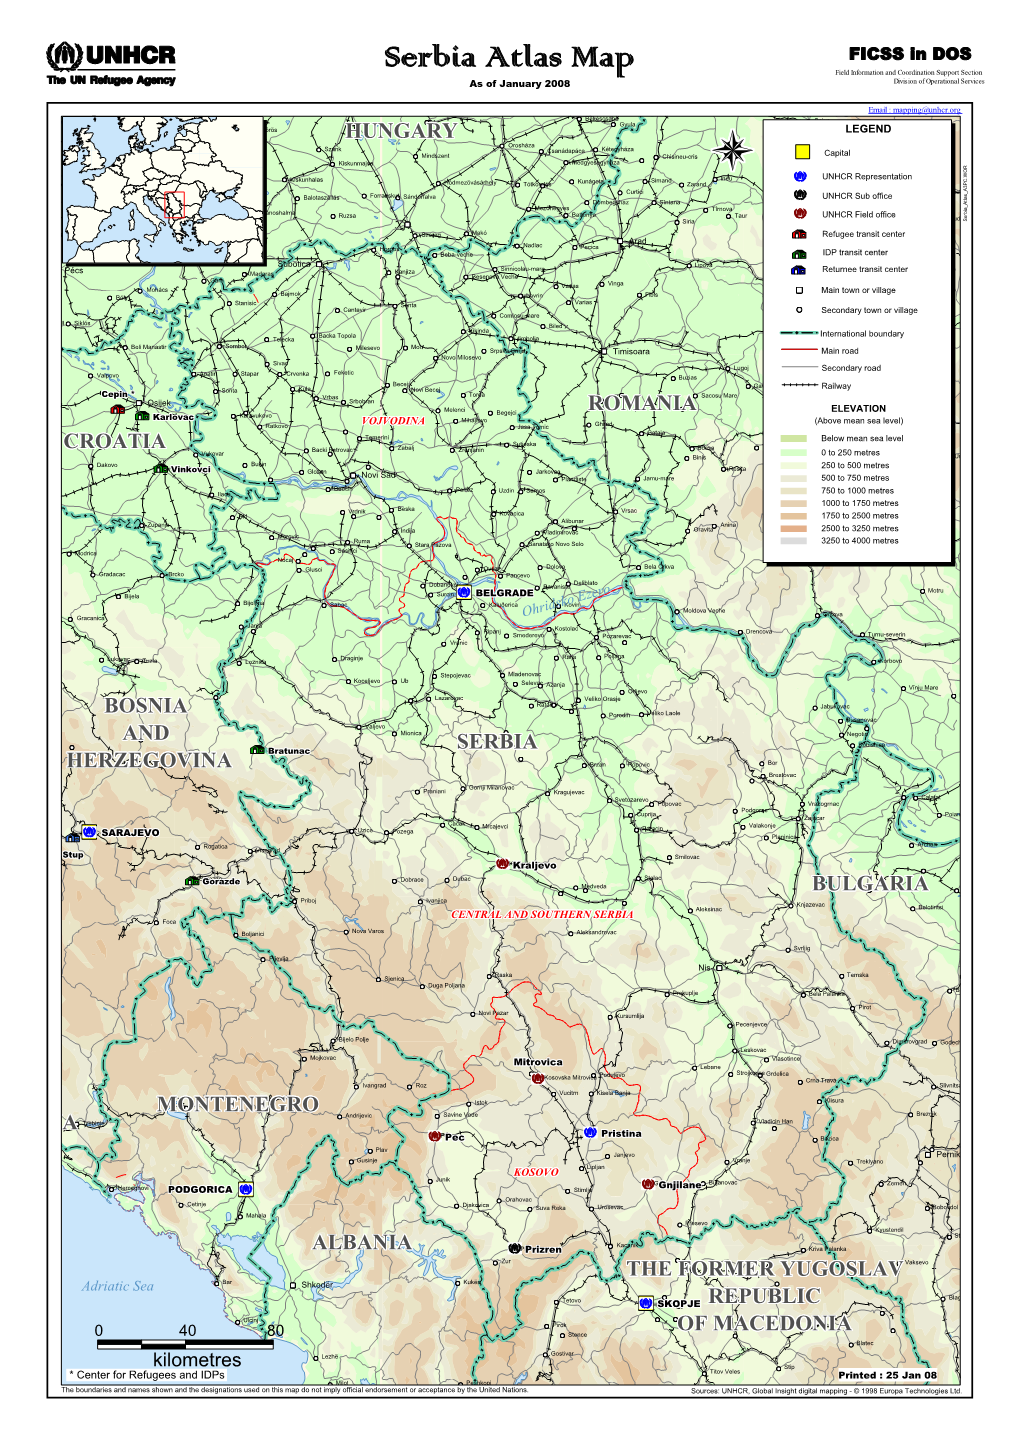 Serbia Atlas Map Field Information and Coordination Support Section As of January 2008 Division of Operational Services